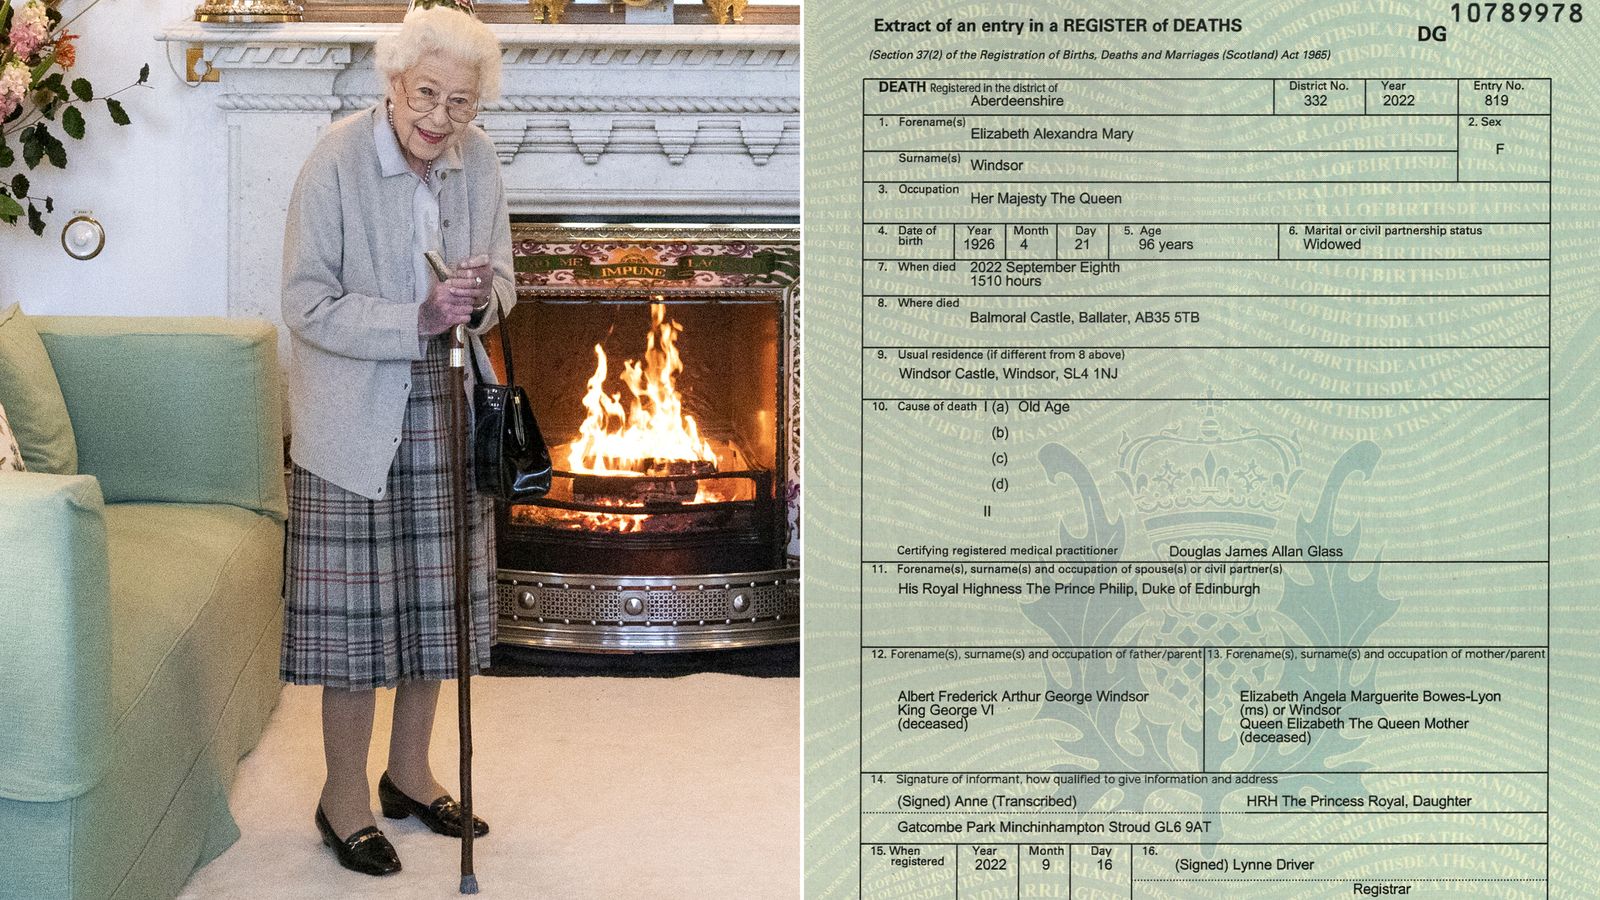 Queen's cause of death revealed in extract of certificate